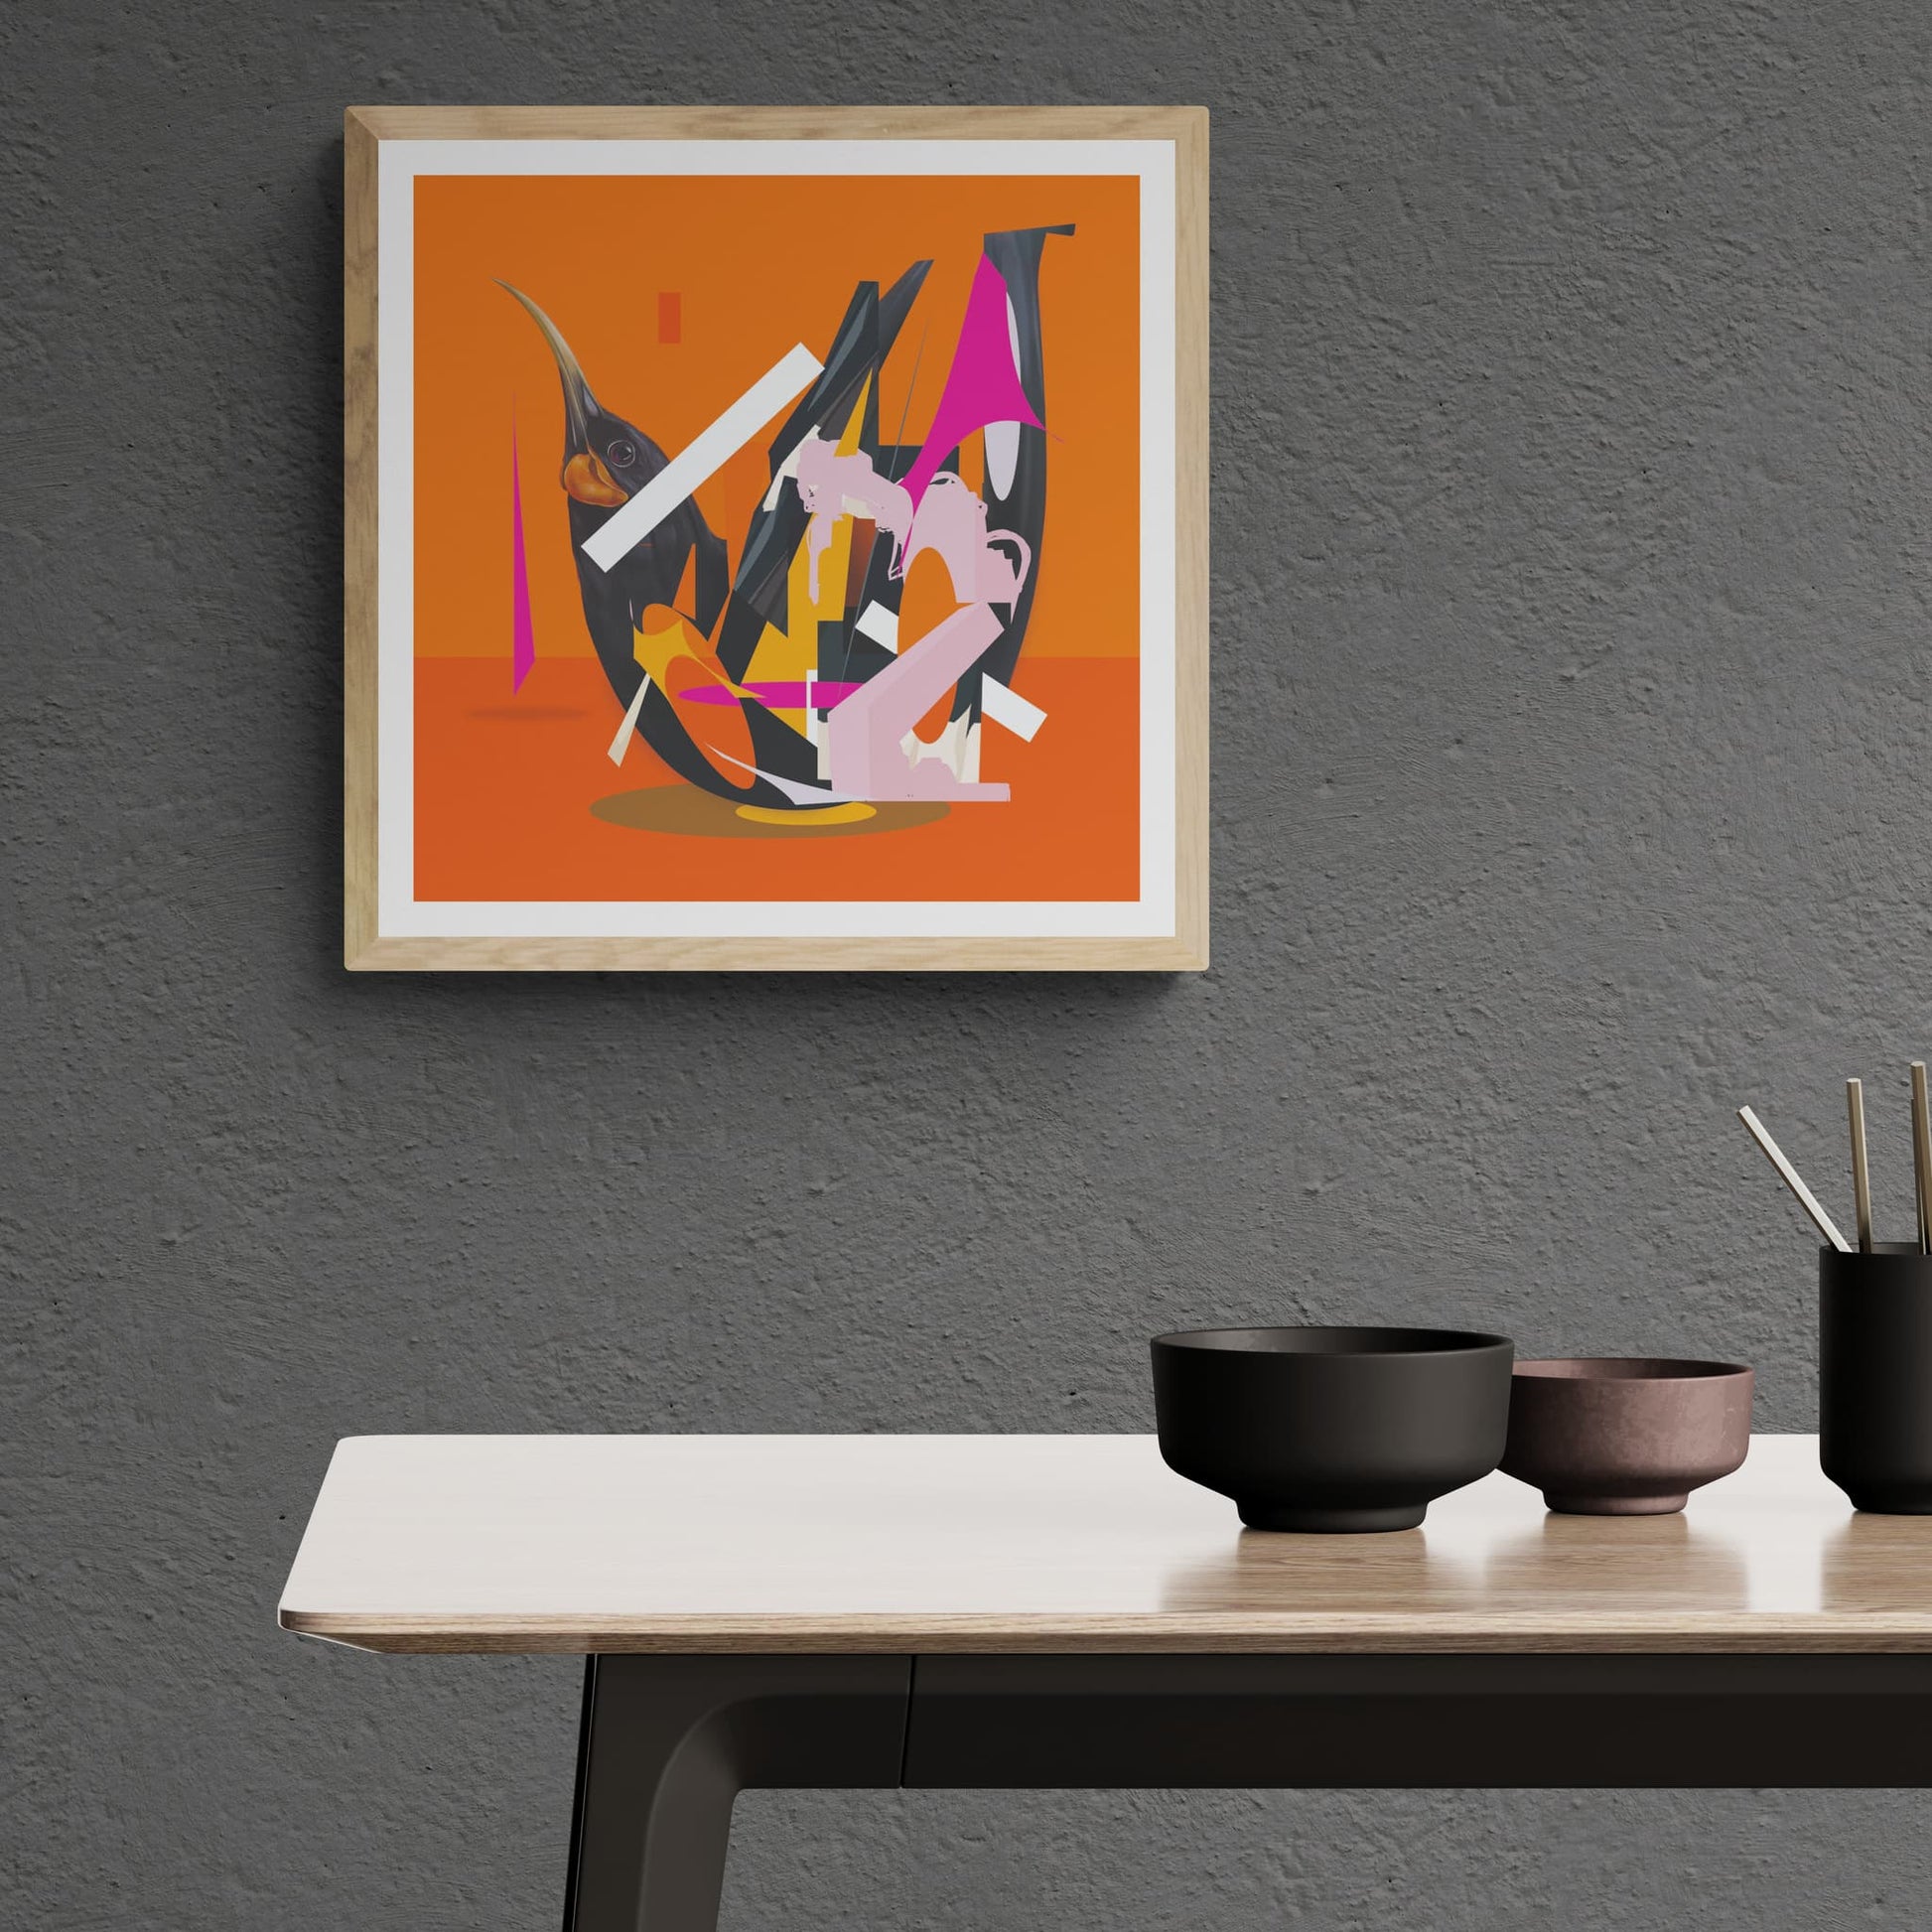 Colourful red, orange & pink abstract print of  a Huia on a bright orange back ground, hanging on wall above a table.